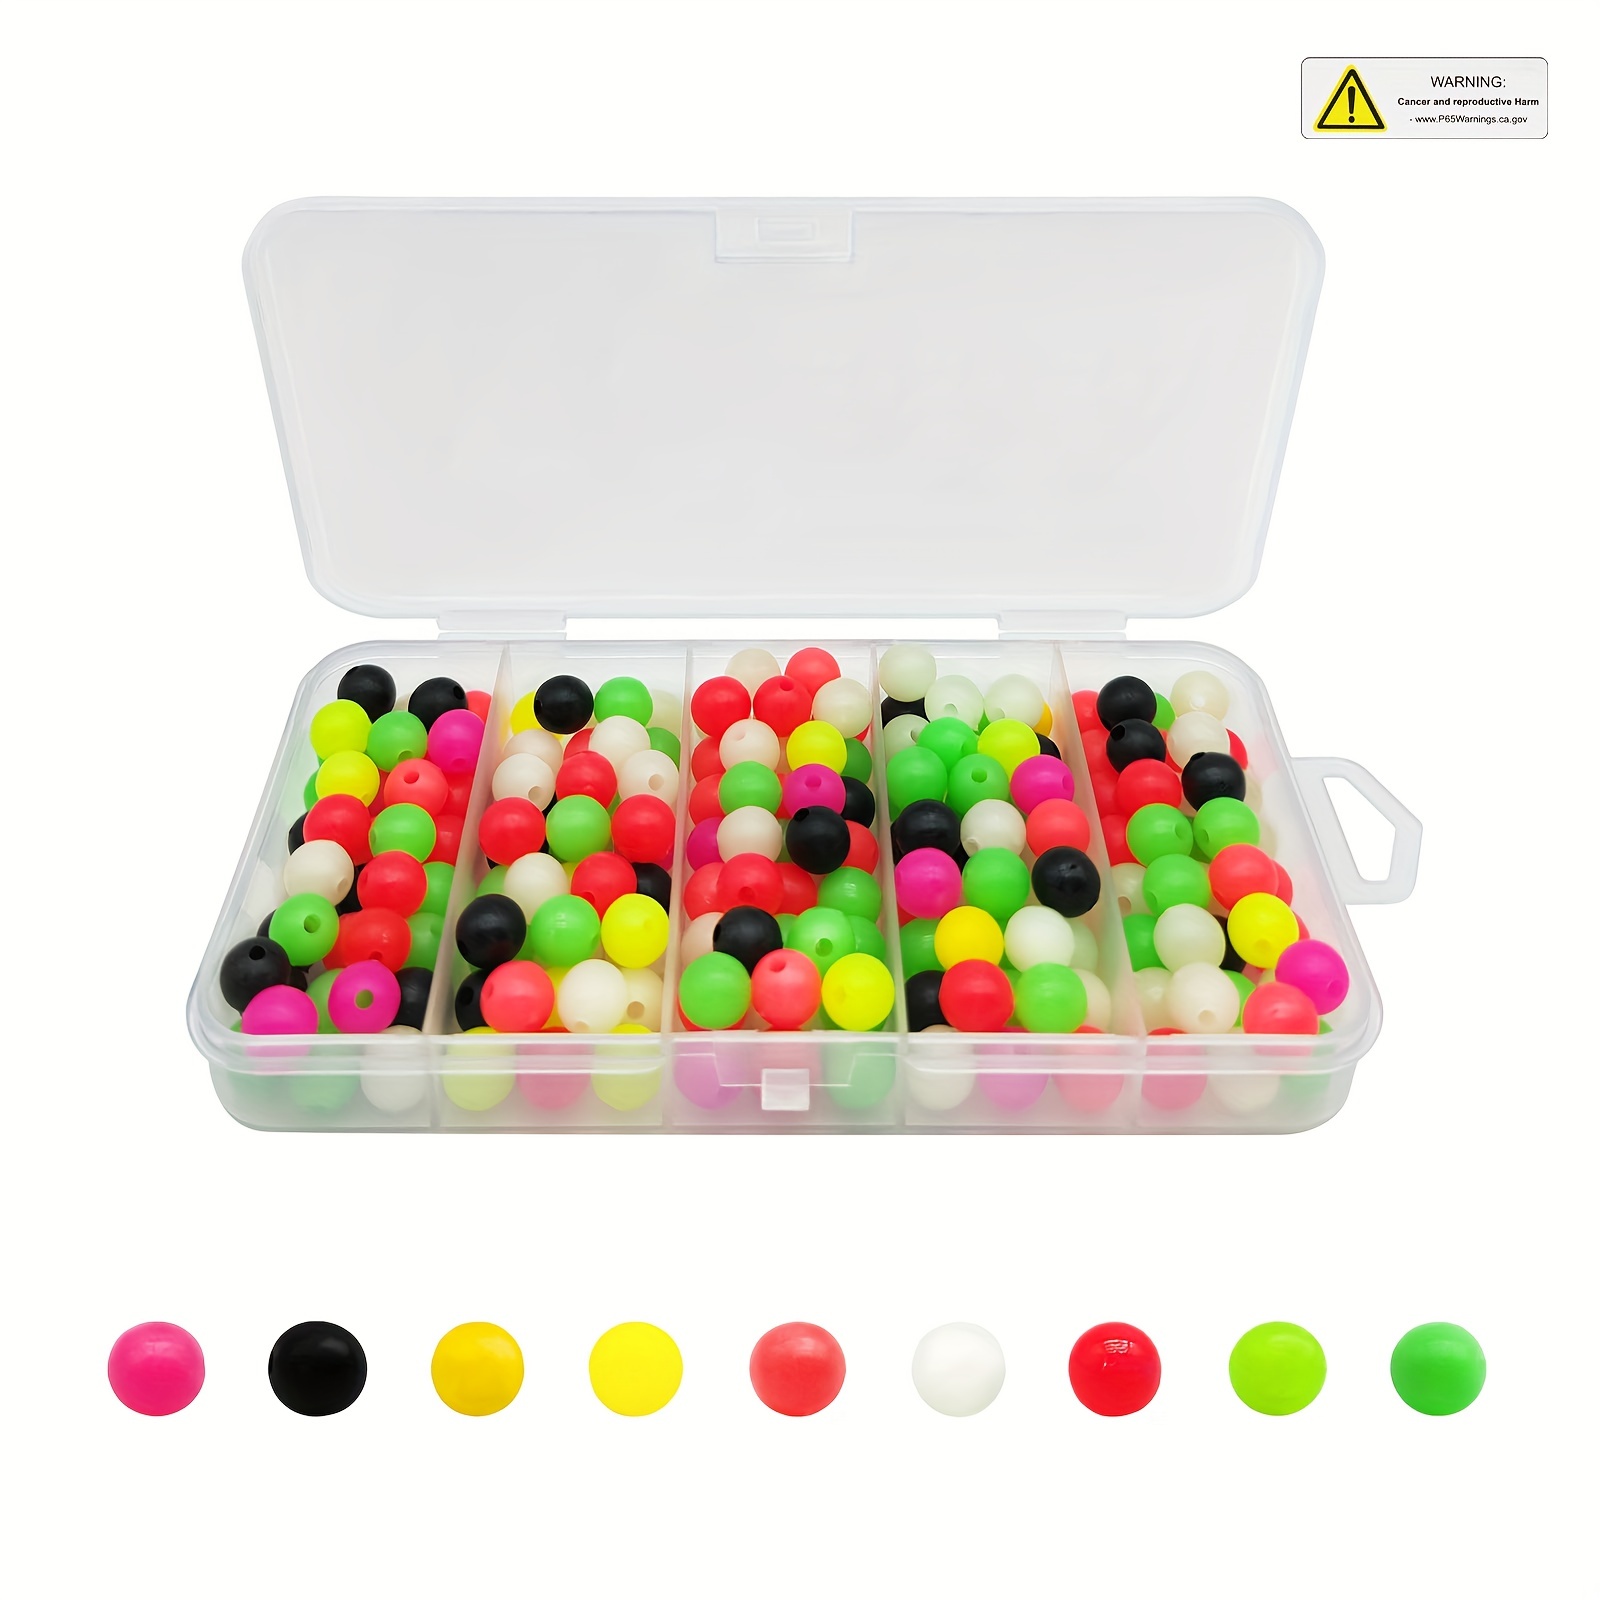 Plastic Assorted Round Float Glow Beads Fishing Bait Eggs Tackle Lures  Tools Accessory For Outdoor Fishing,1000pcs/Box Fishing Beads, 1000pcs/Box  Fishing Beads, Plastic Assorted Round Glow Fishi